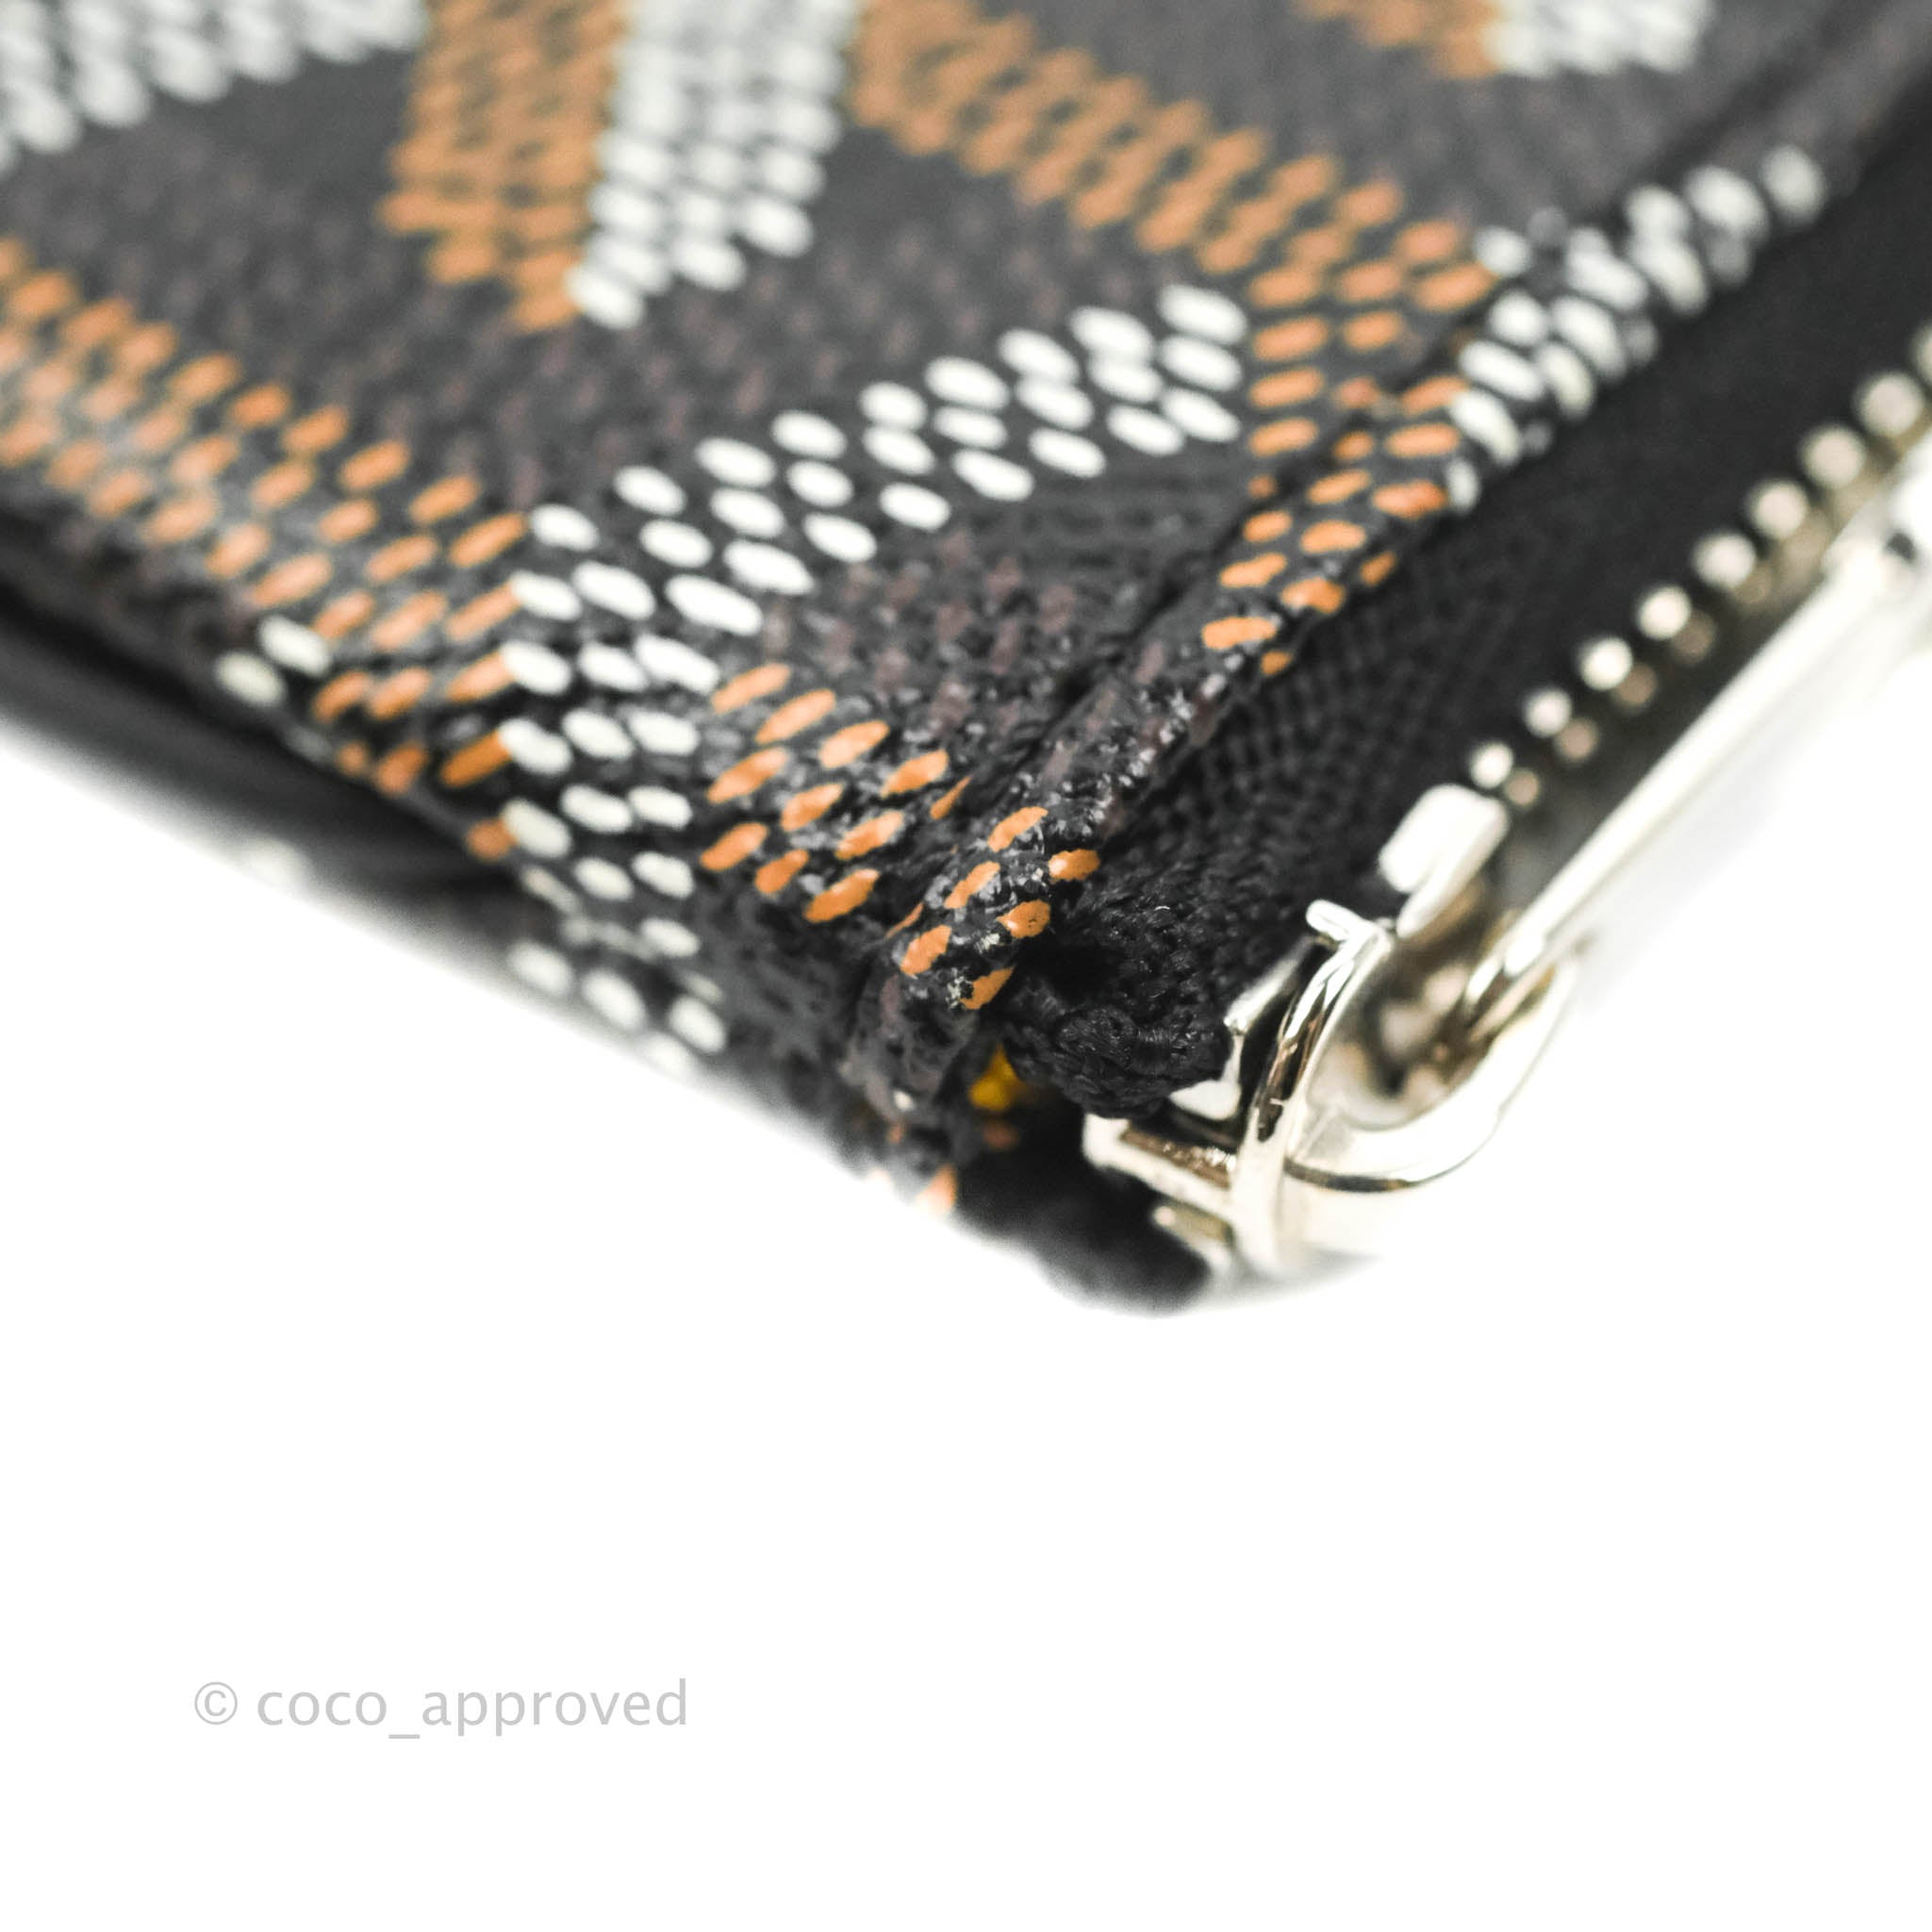 Goyard Large Senat Pouch in Black - The Palm Beach Trunk Designer Resale  and Luxury Consignment